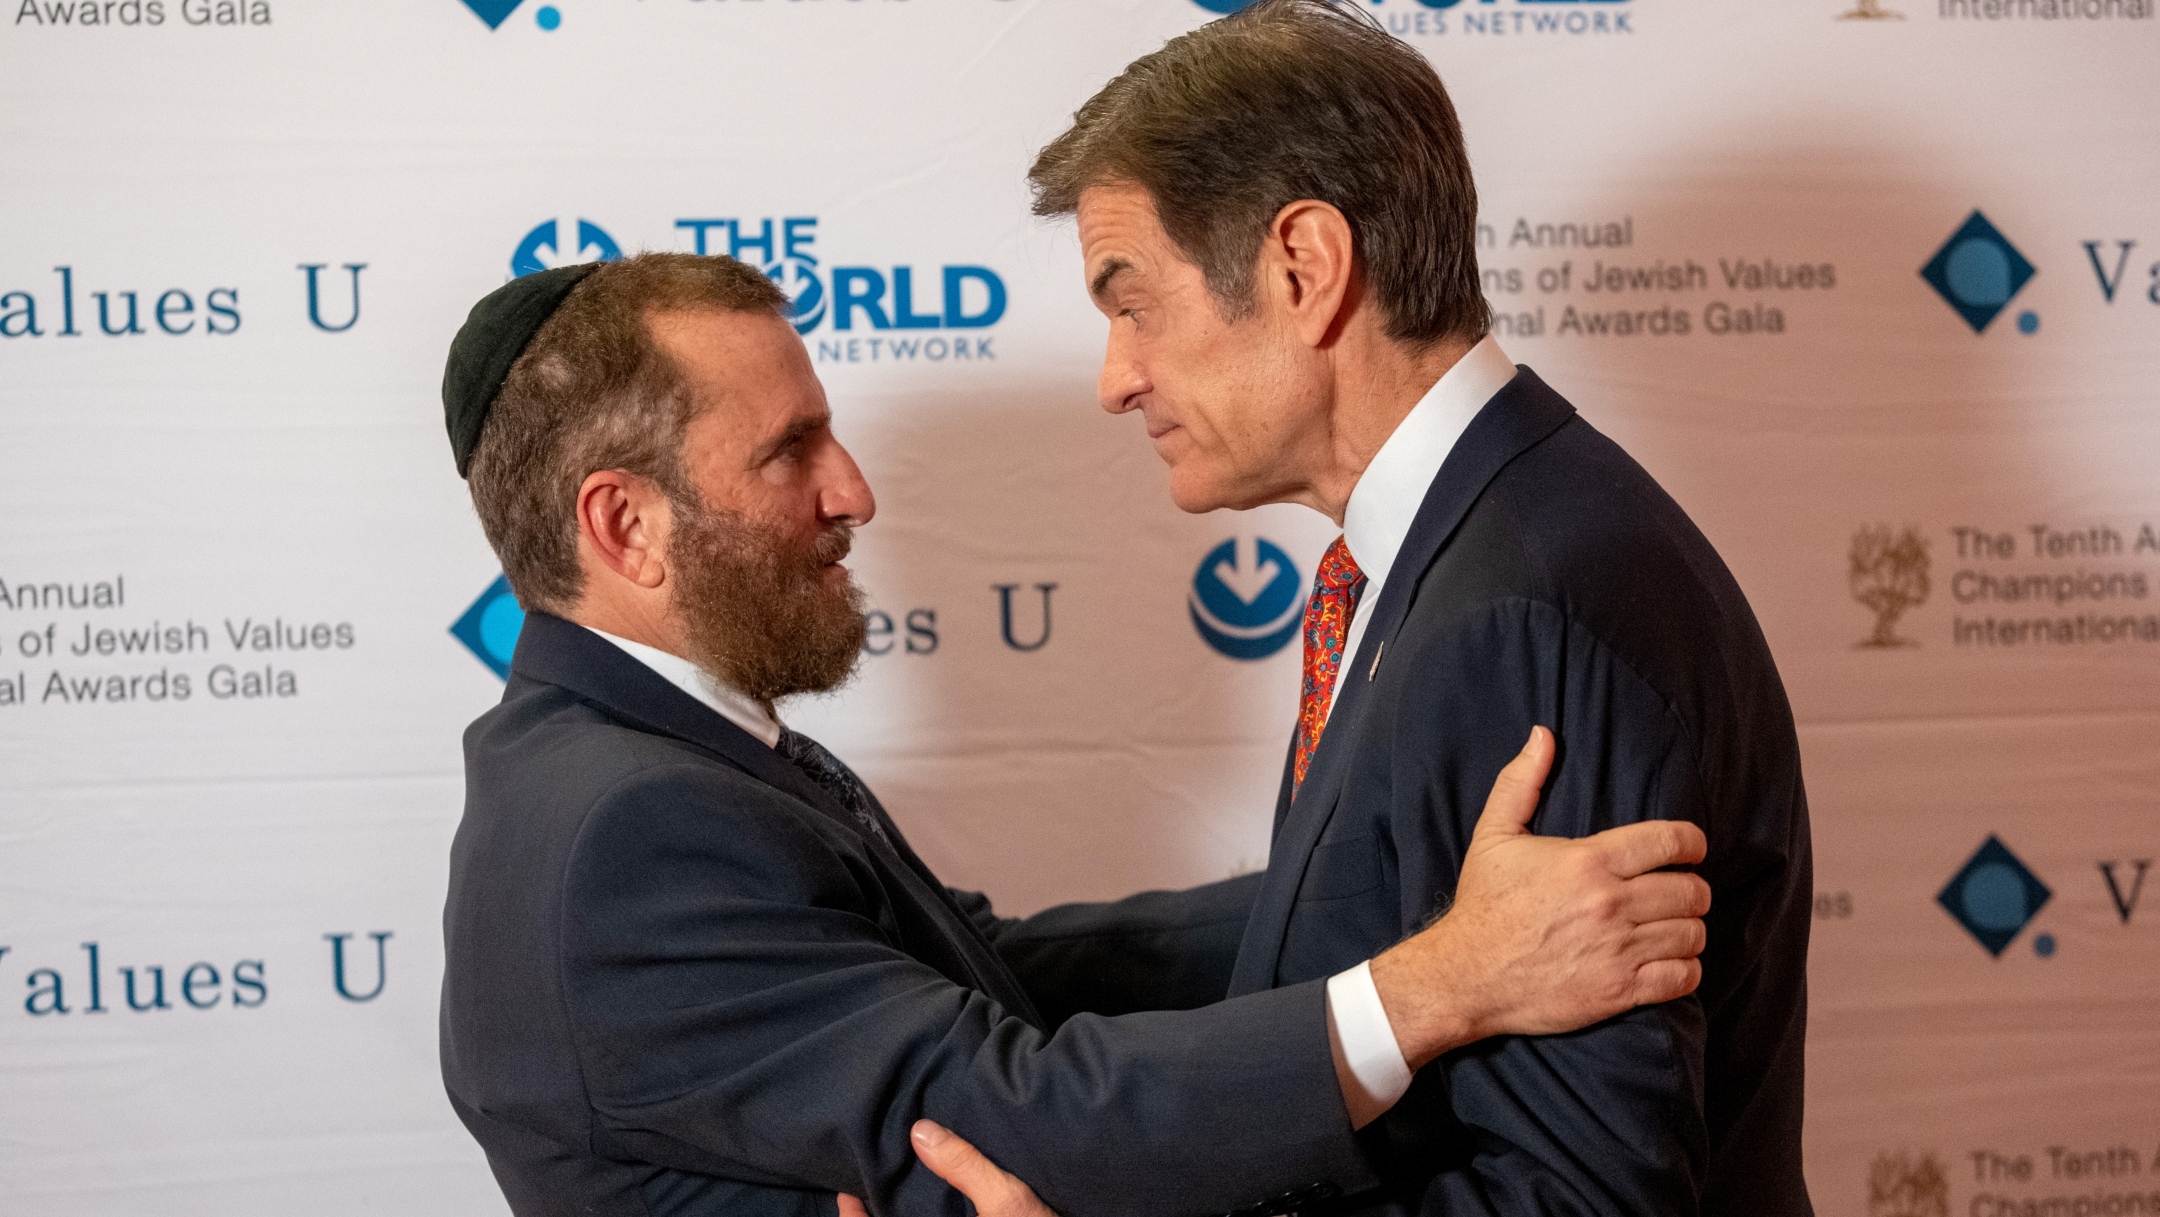 Rabbi Shmuley Boteach, and Dr. Mehmet Oz speak at The 2022 Champions Of Jewish Values Gala at Carnegie Hall in New York City, Jan. 20, 2022. (Alexi Rosenfeld/Getty Images)